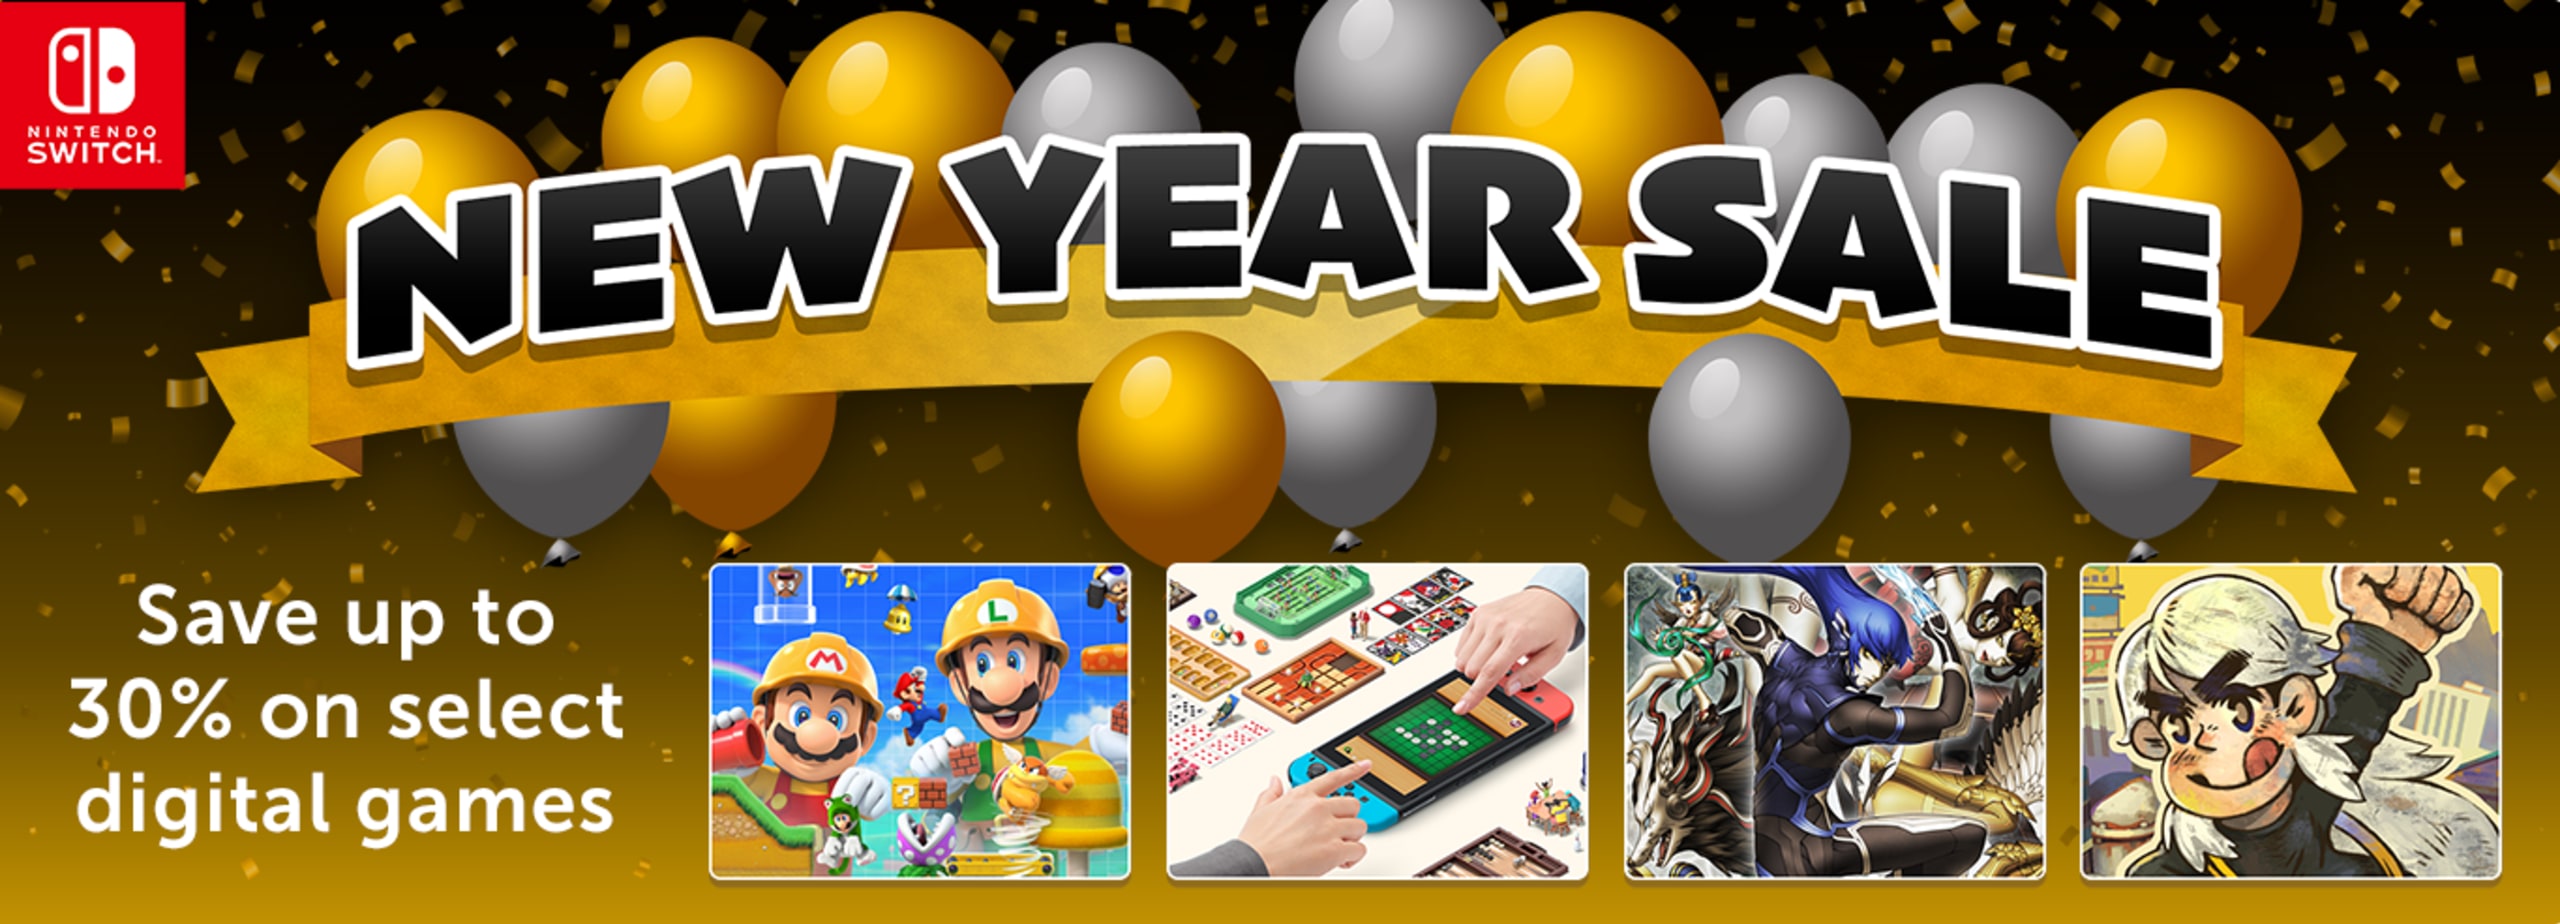 New Year Sale - Last chance, ends 1/16 at 11:59 p.m. PT